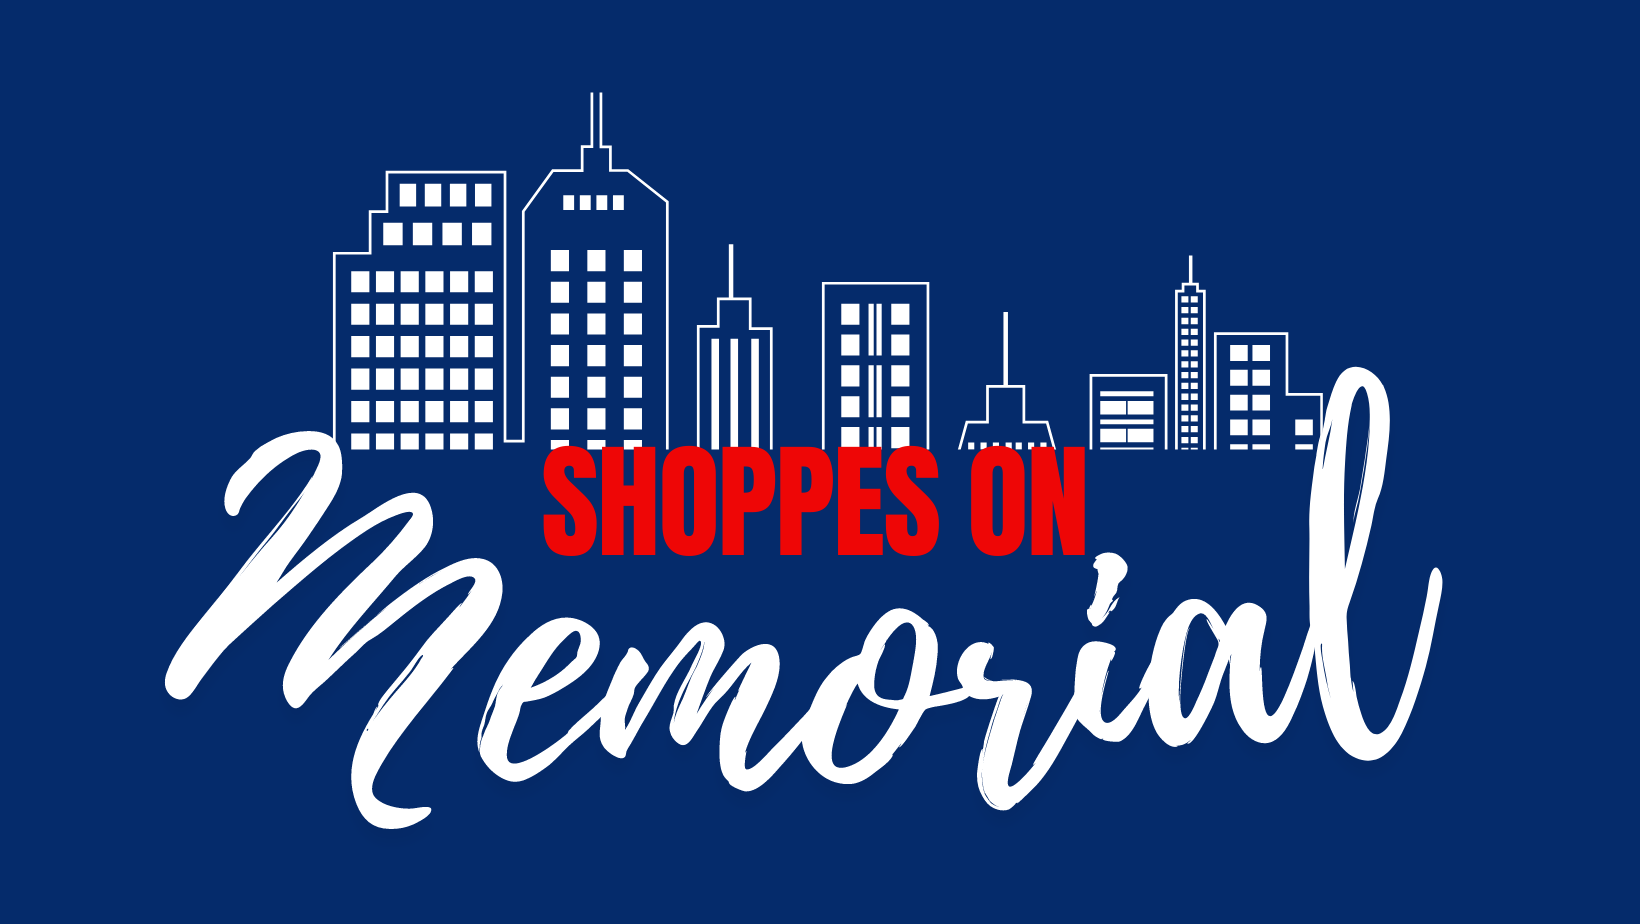 Shoppes On Memorial Teams Up with Date Academy to Host Series of Youth Entrepreneur Pop-Up Shops and Workshop Sessions for Local Young Innovative Leaders